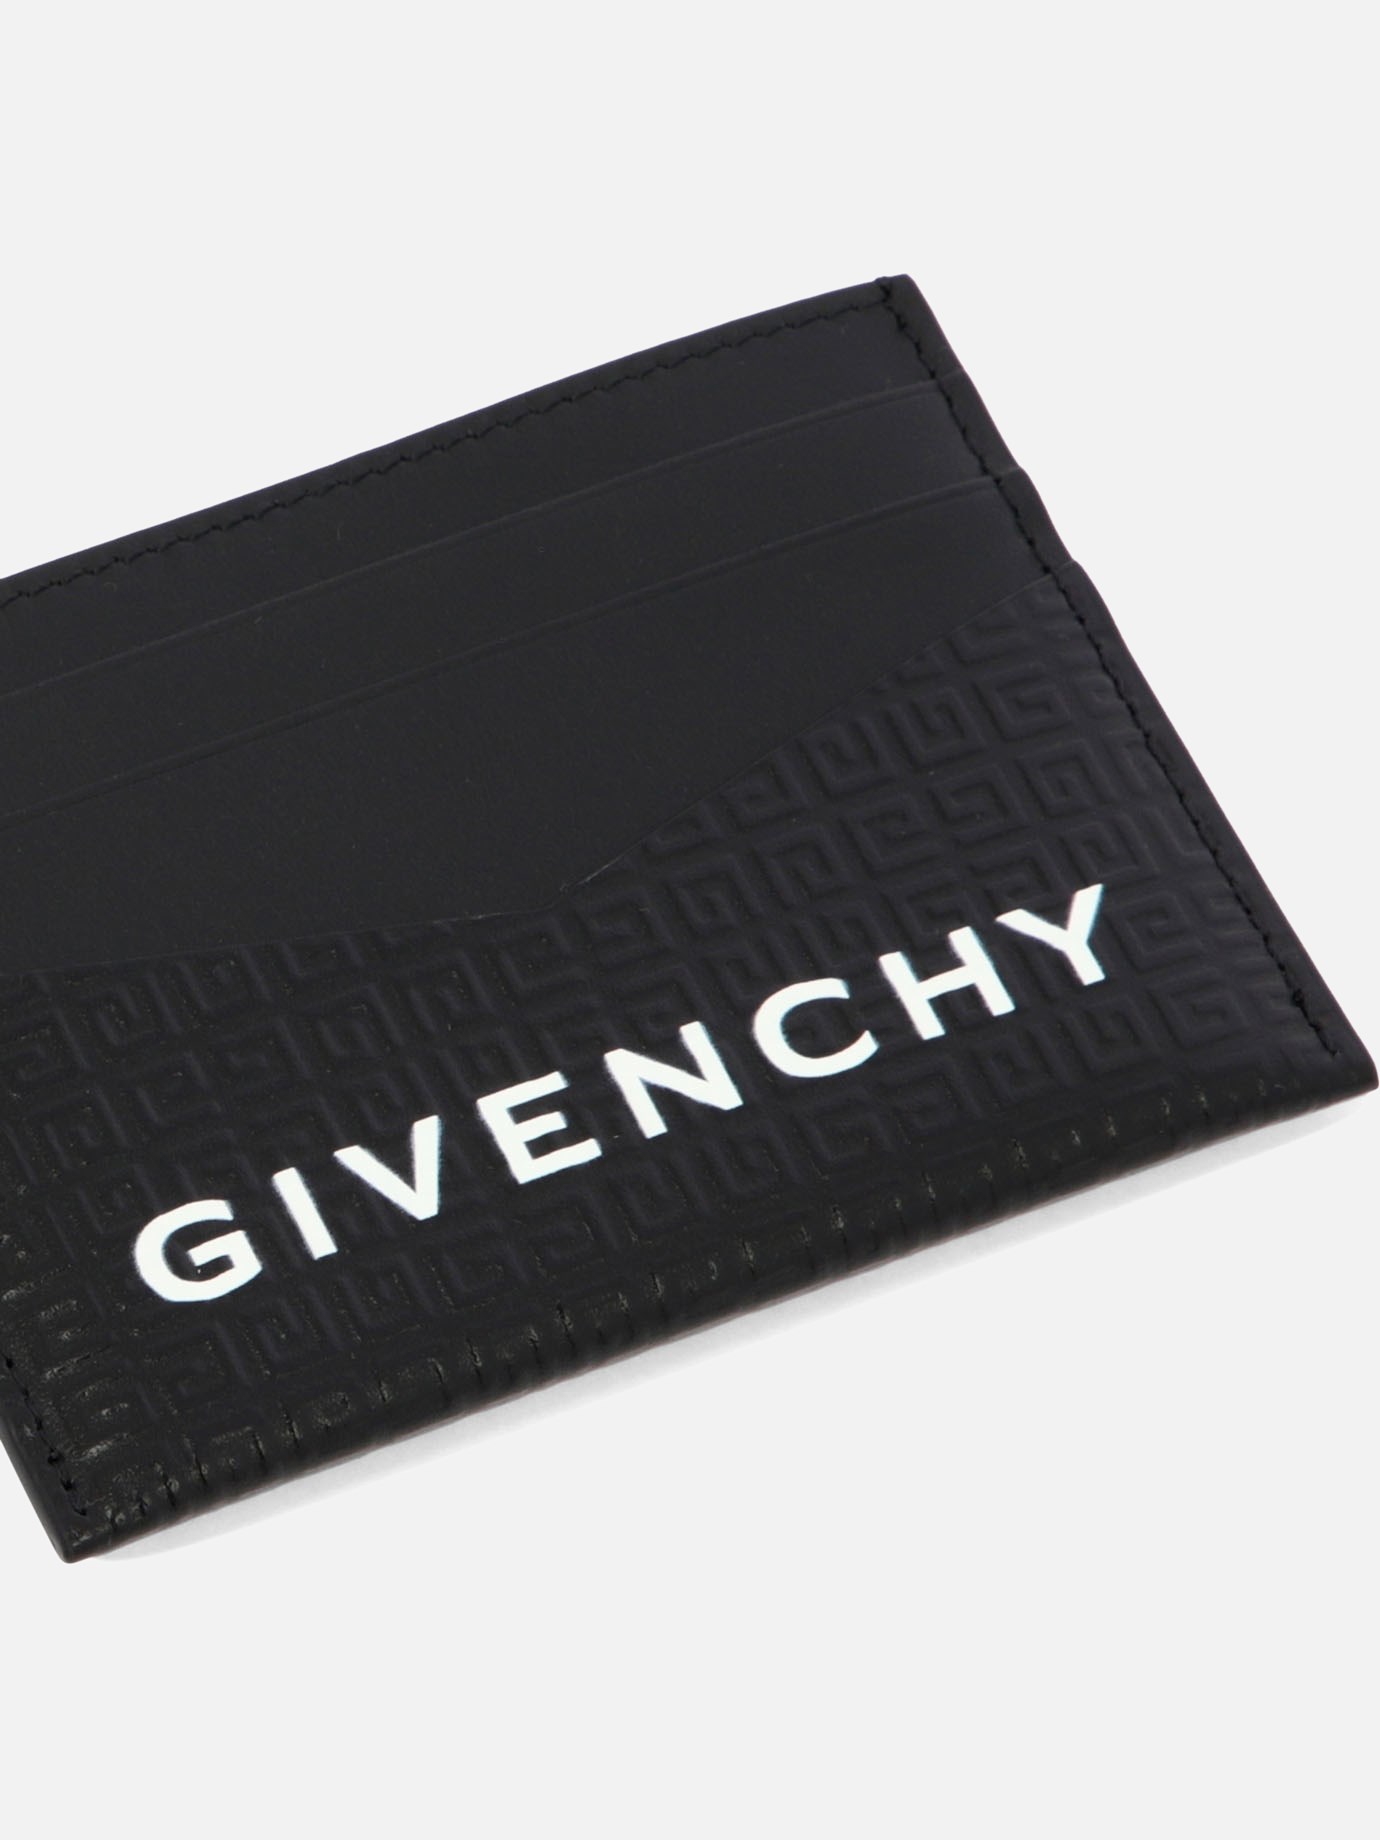 Portacarte  G Cut  by Givenchy